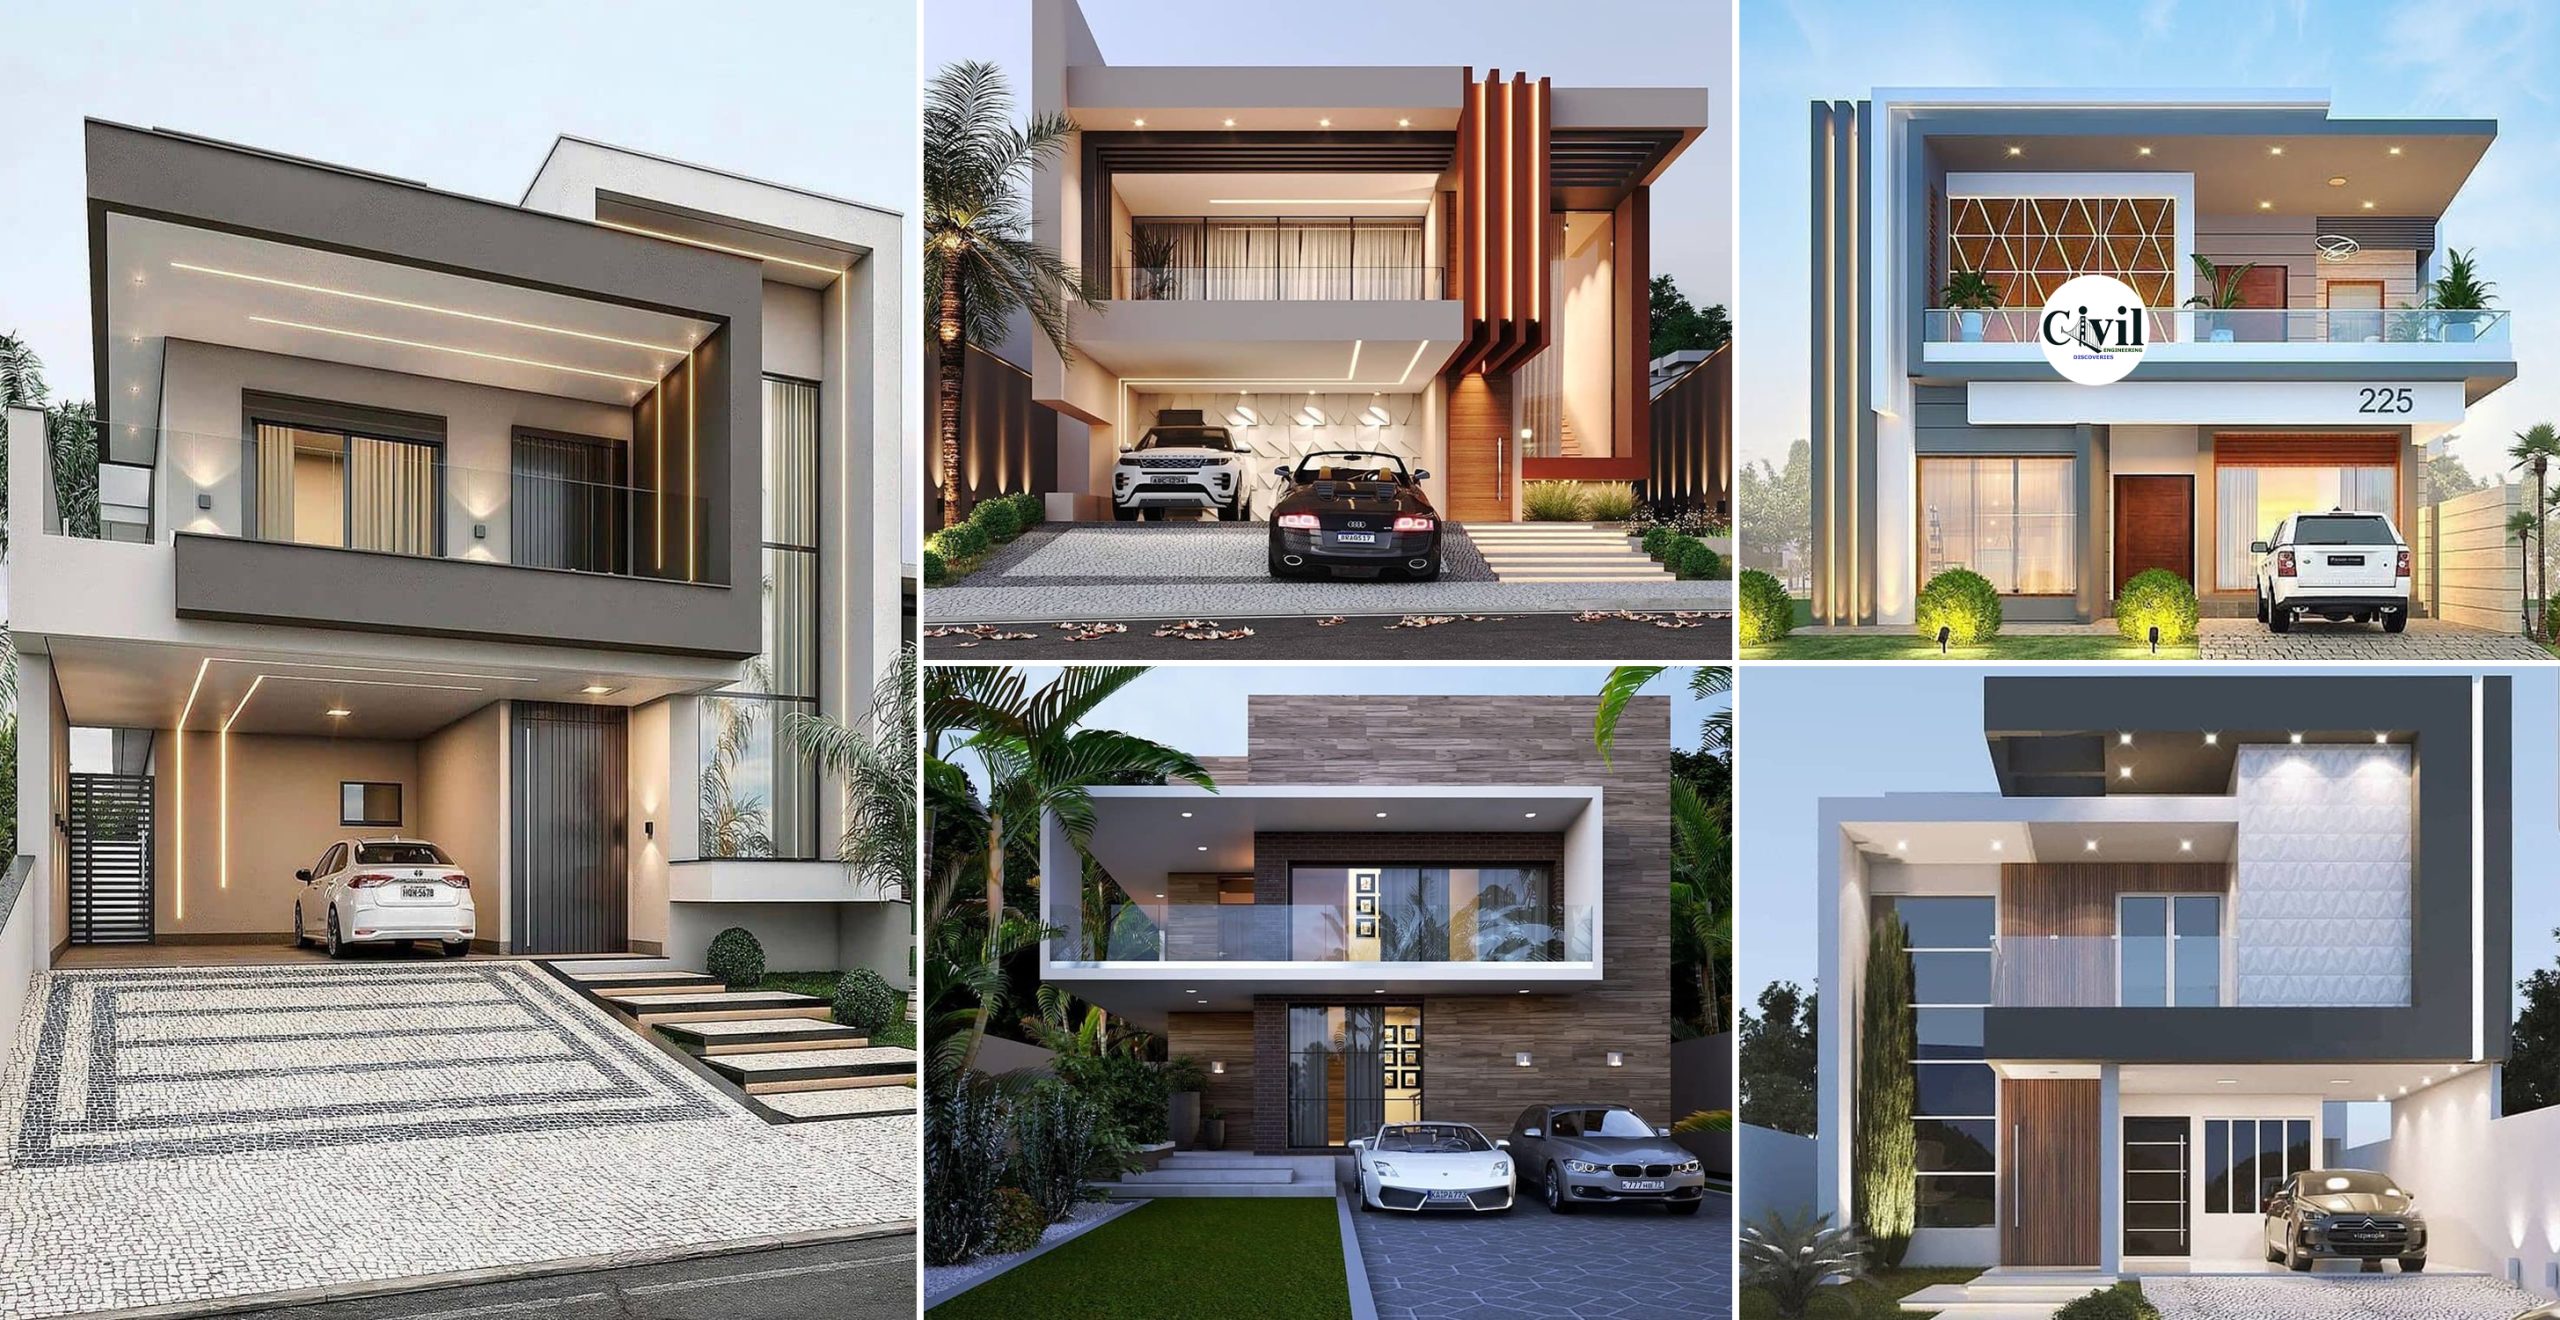 35 Modern House Design Ideas For 2021 - Engineering Discoveries